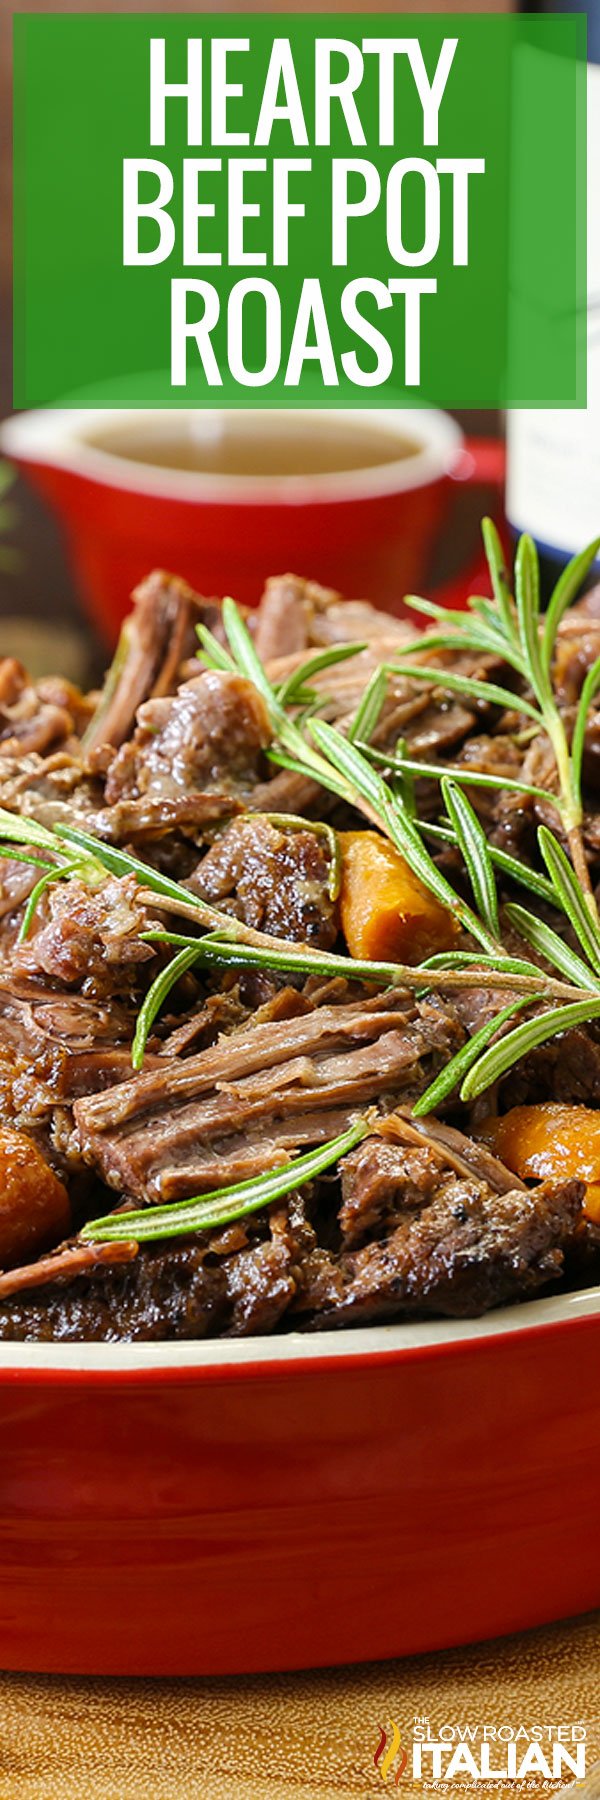 Hearty Beef Chuck Roast in the Oven - PIN